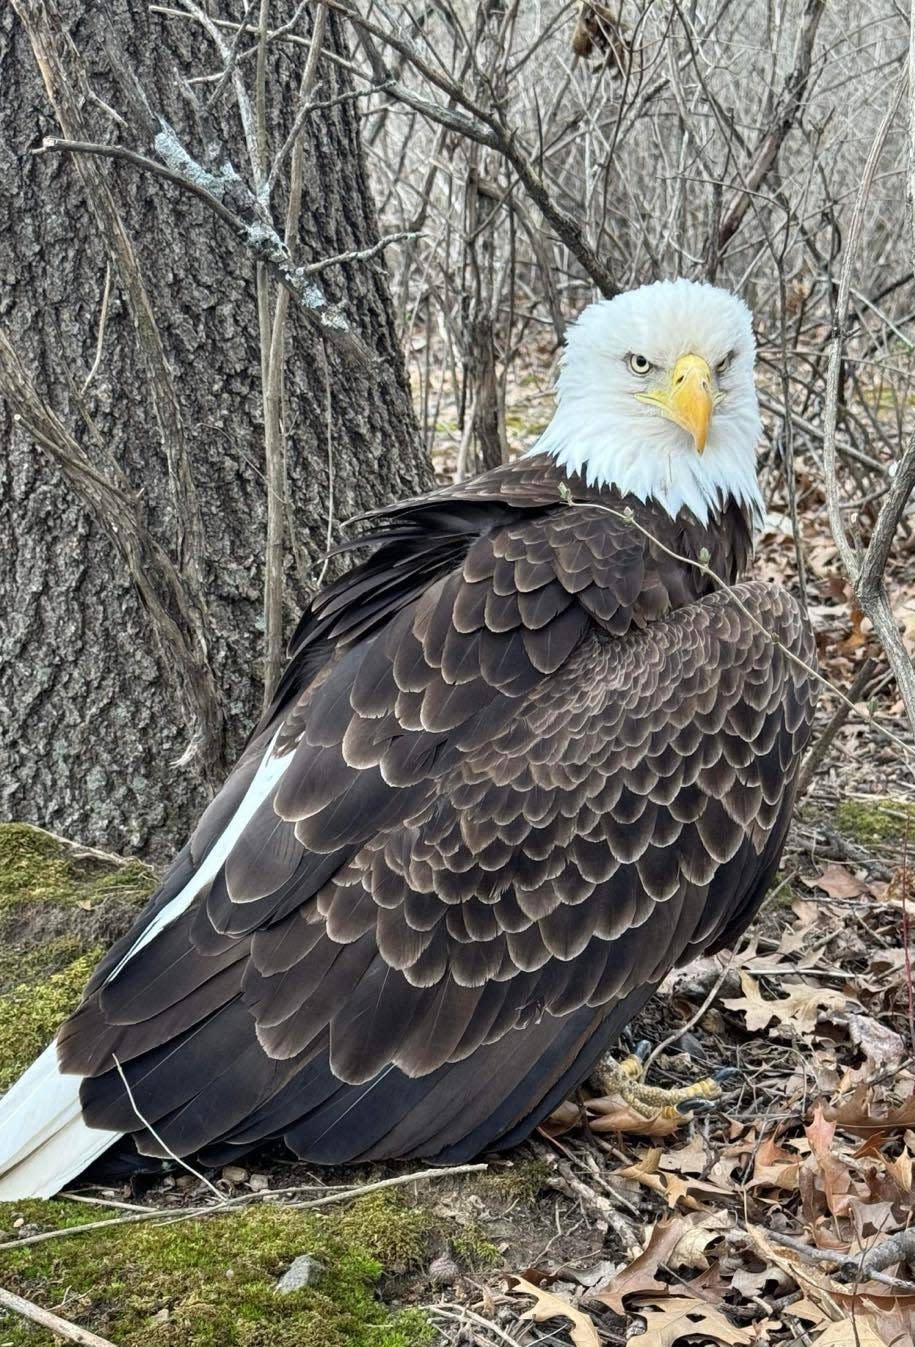 A bald eagle is photographed March 14 near Brooklyn in Dane County. The bird, which had been illegally shot and was also suffering from lead poisoning, was too weak to fly. It died the next day. A reward has been established for information leading to a conviction of the shooter.